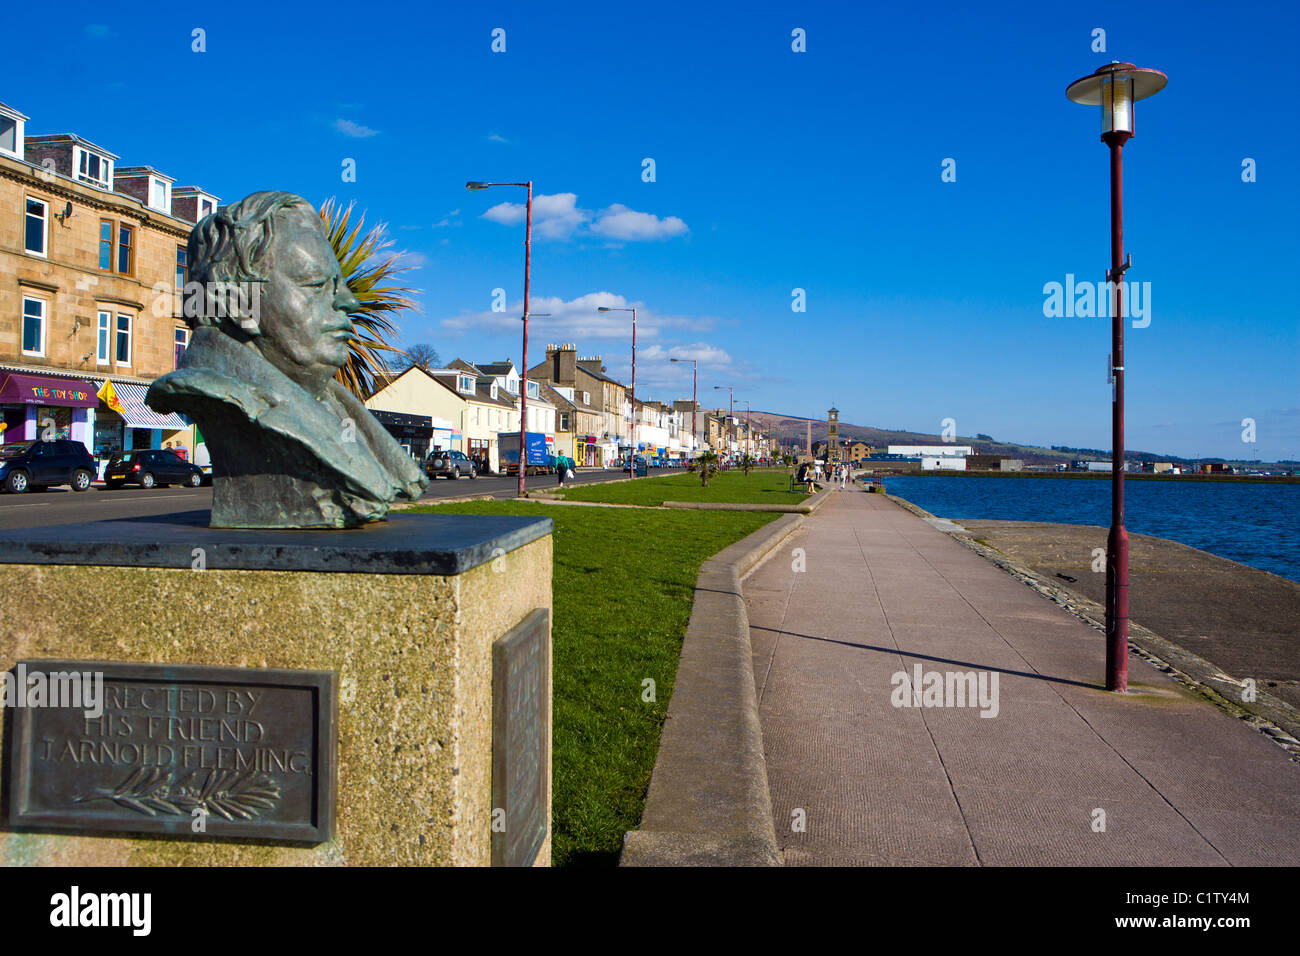 THE TOWN OF HELENSBURGH ON THE CLYDE WITH A BLURRED BUST OF ITS MOST FAMOUS CITIZEN JOHN LOGIE BAIRD IN THE FOREGROUND Stock Photo